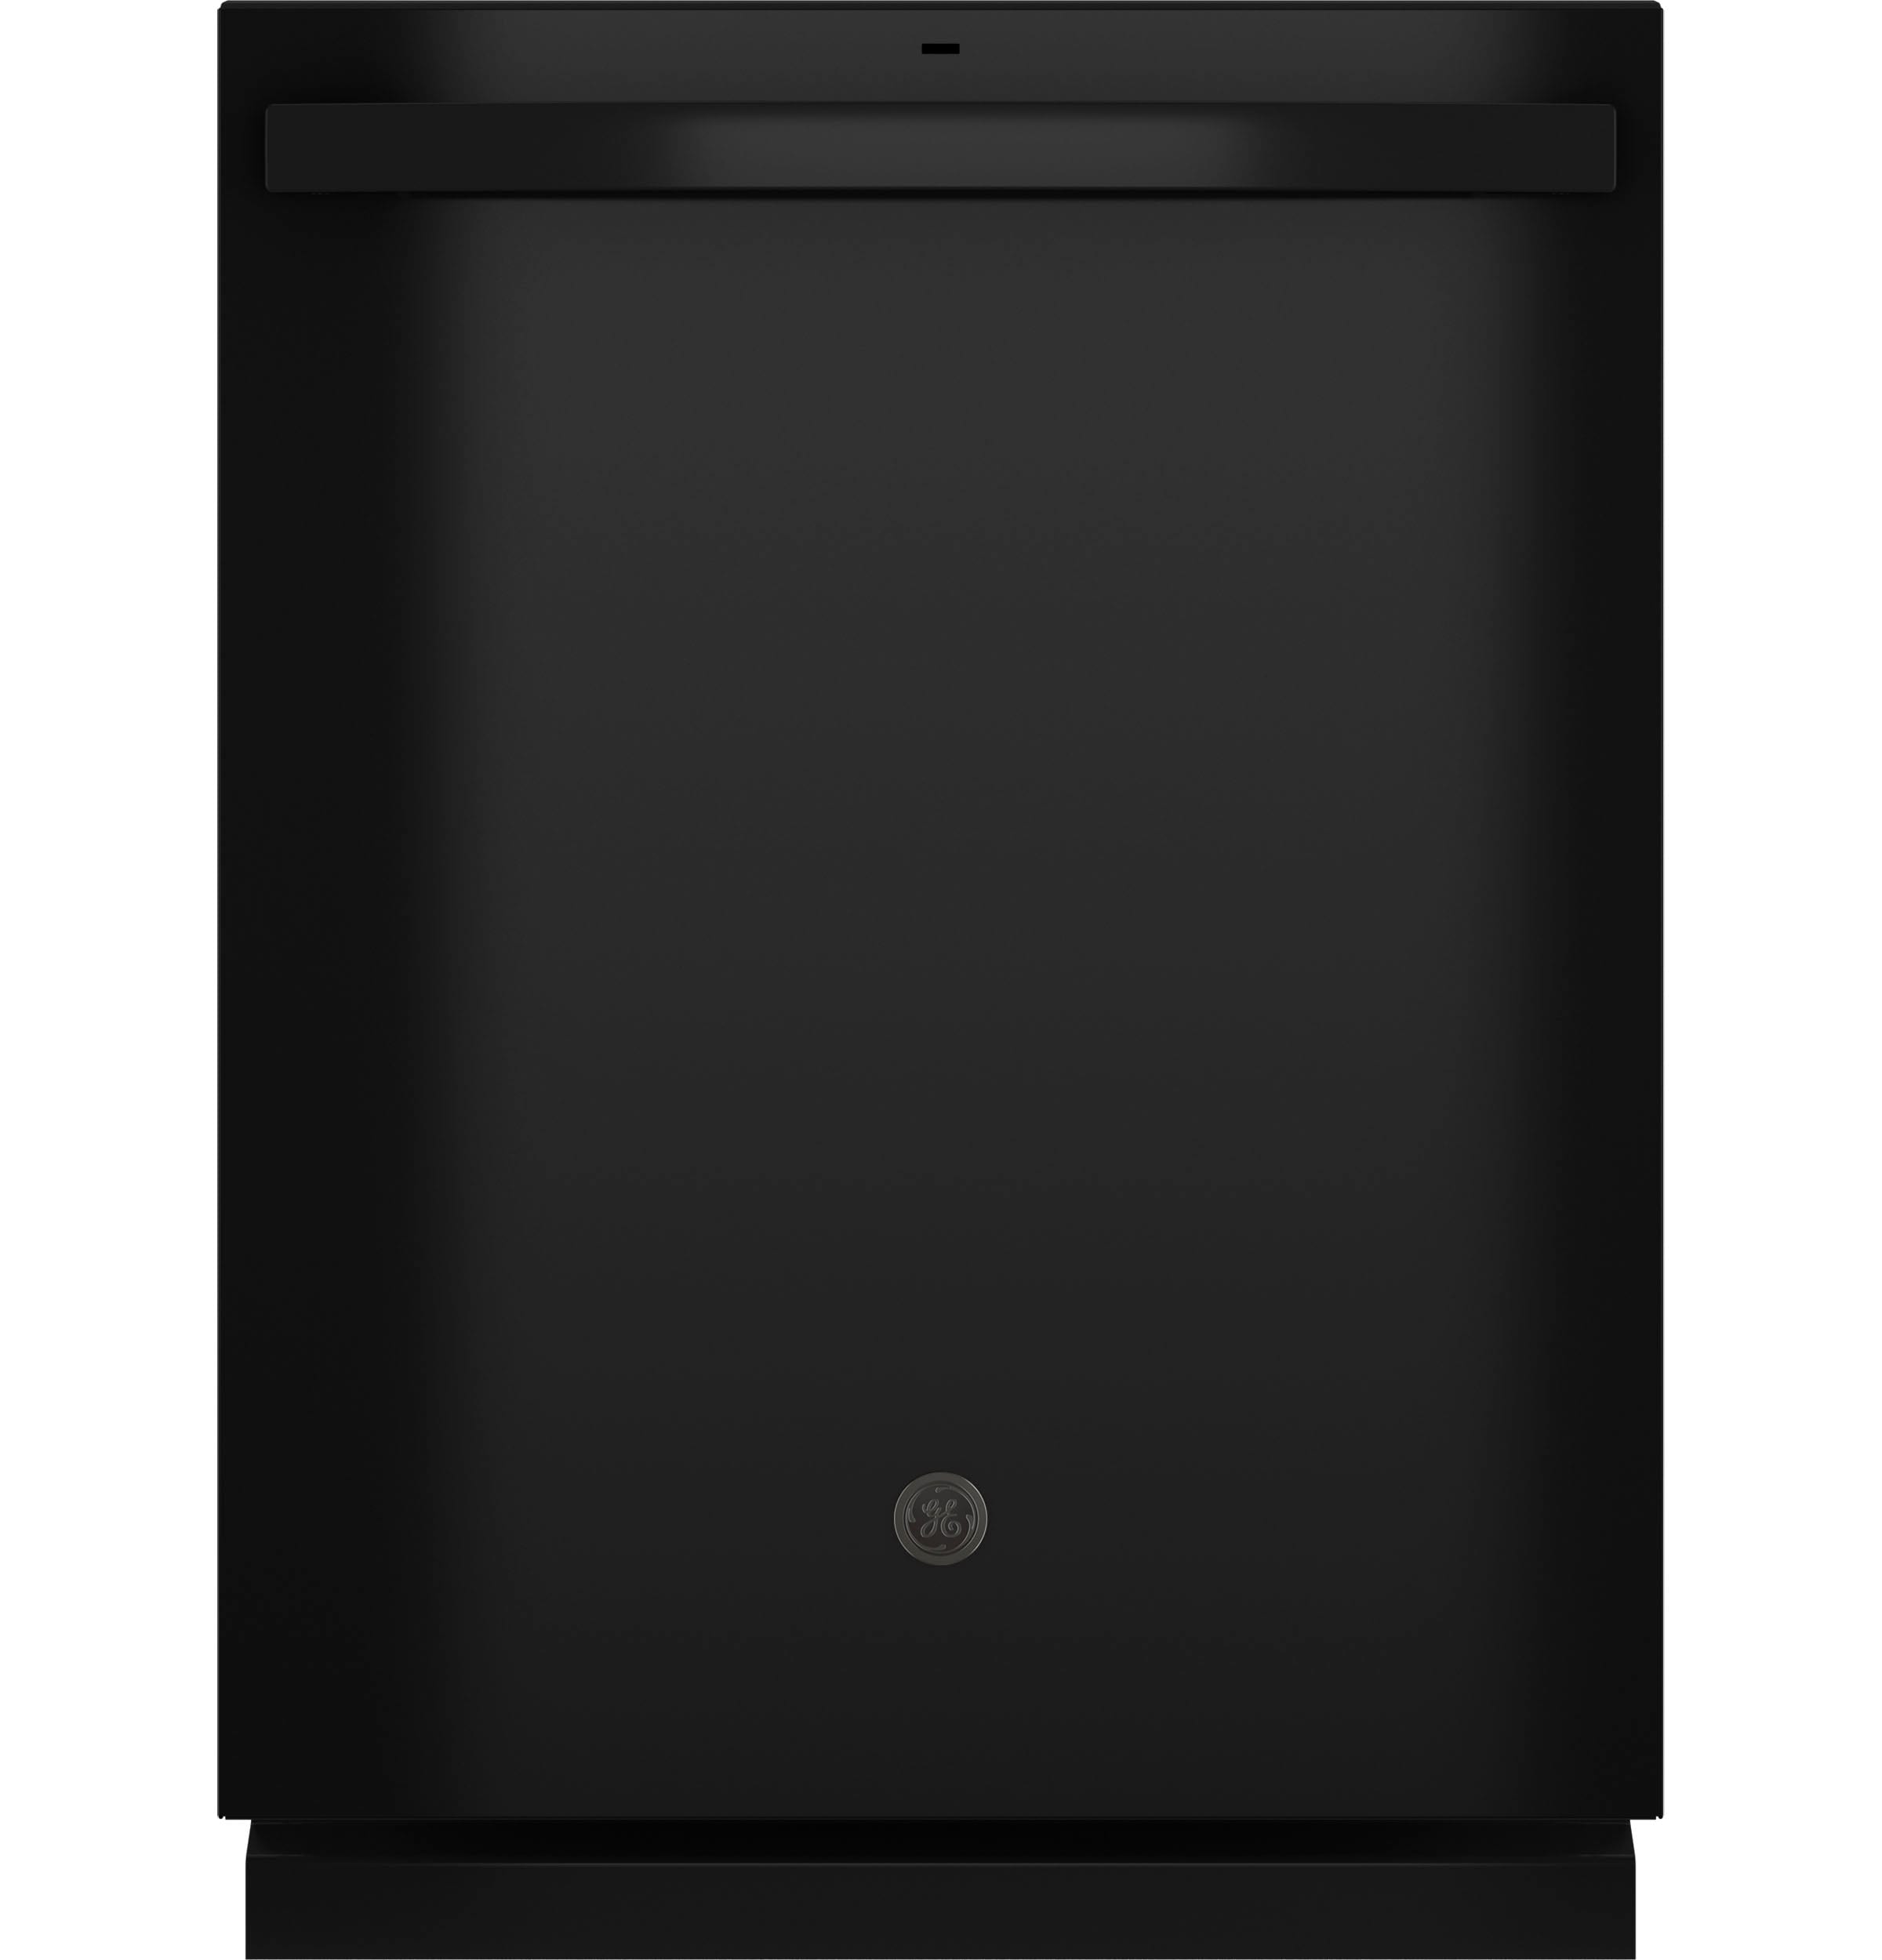 24 in. Top Control Mat Silver Built-in Smart Dishwasher with Finger  Print-Resist and Energy Star